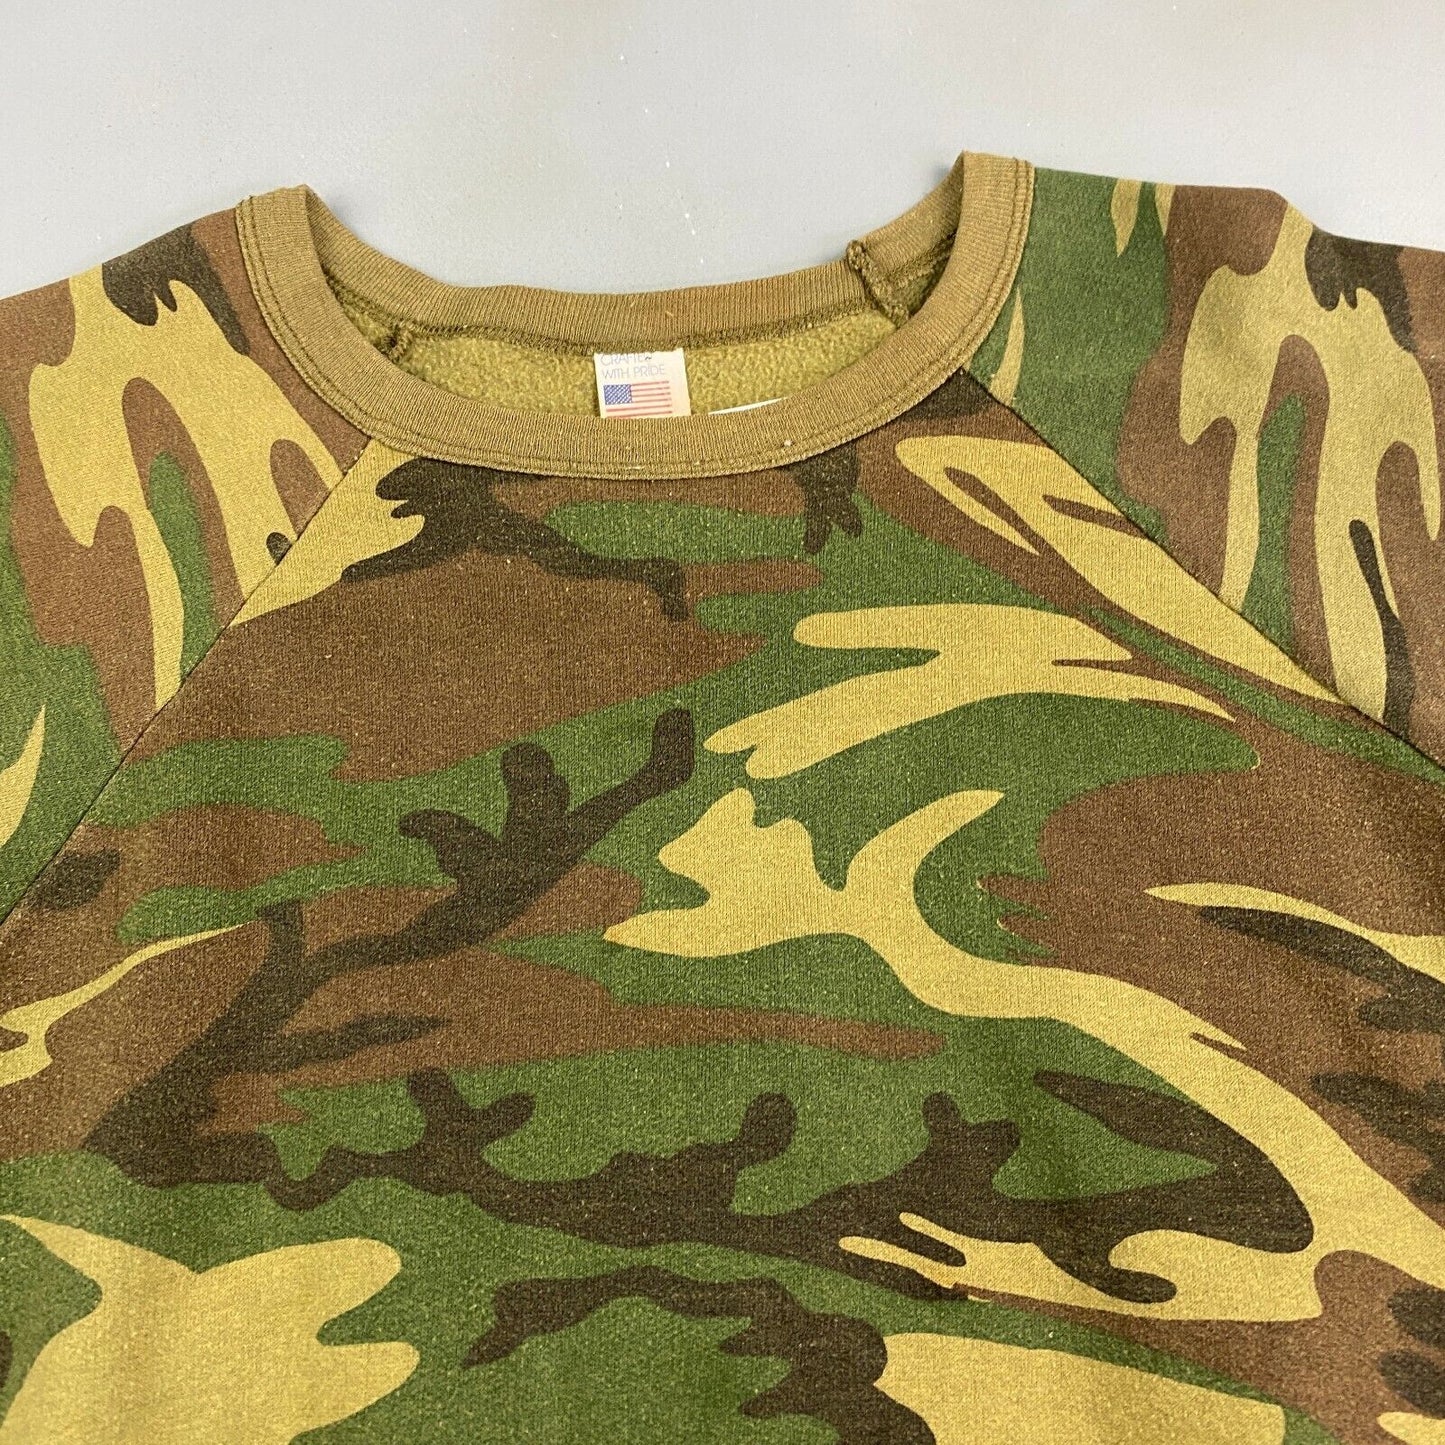 VINTAGE 80s Camouflage Hunting Short Sleeve Sweater sz Small Adult